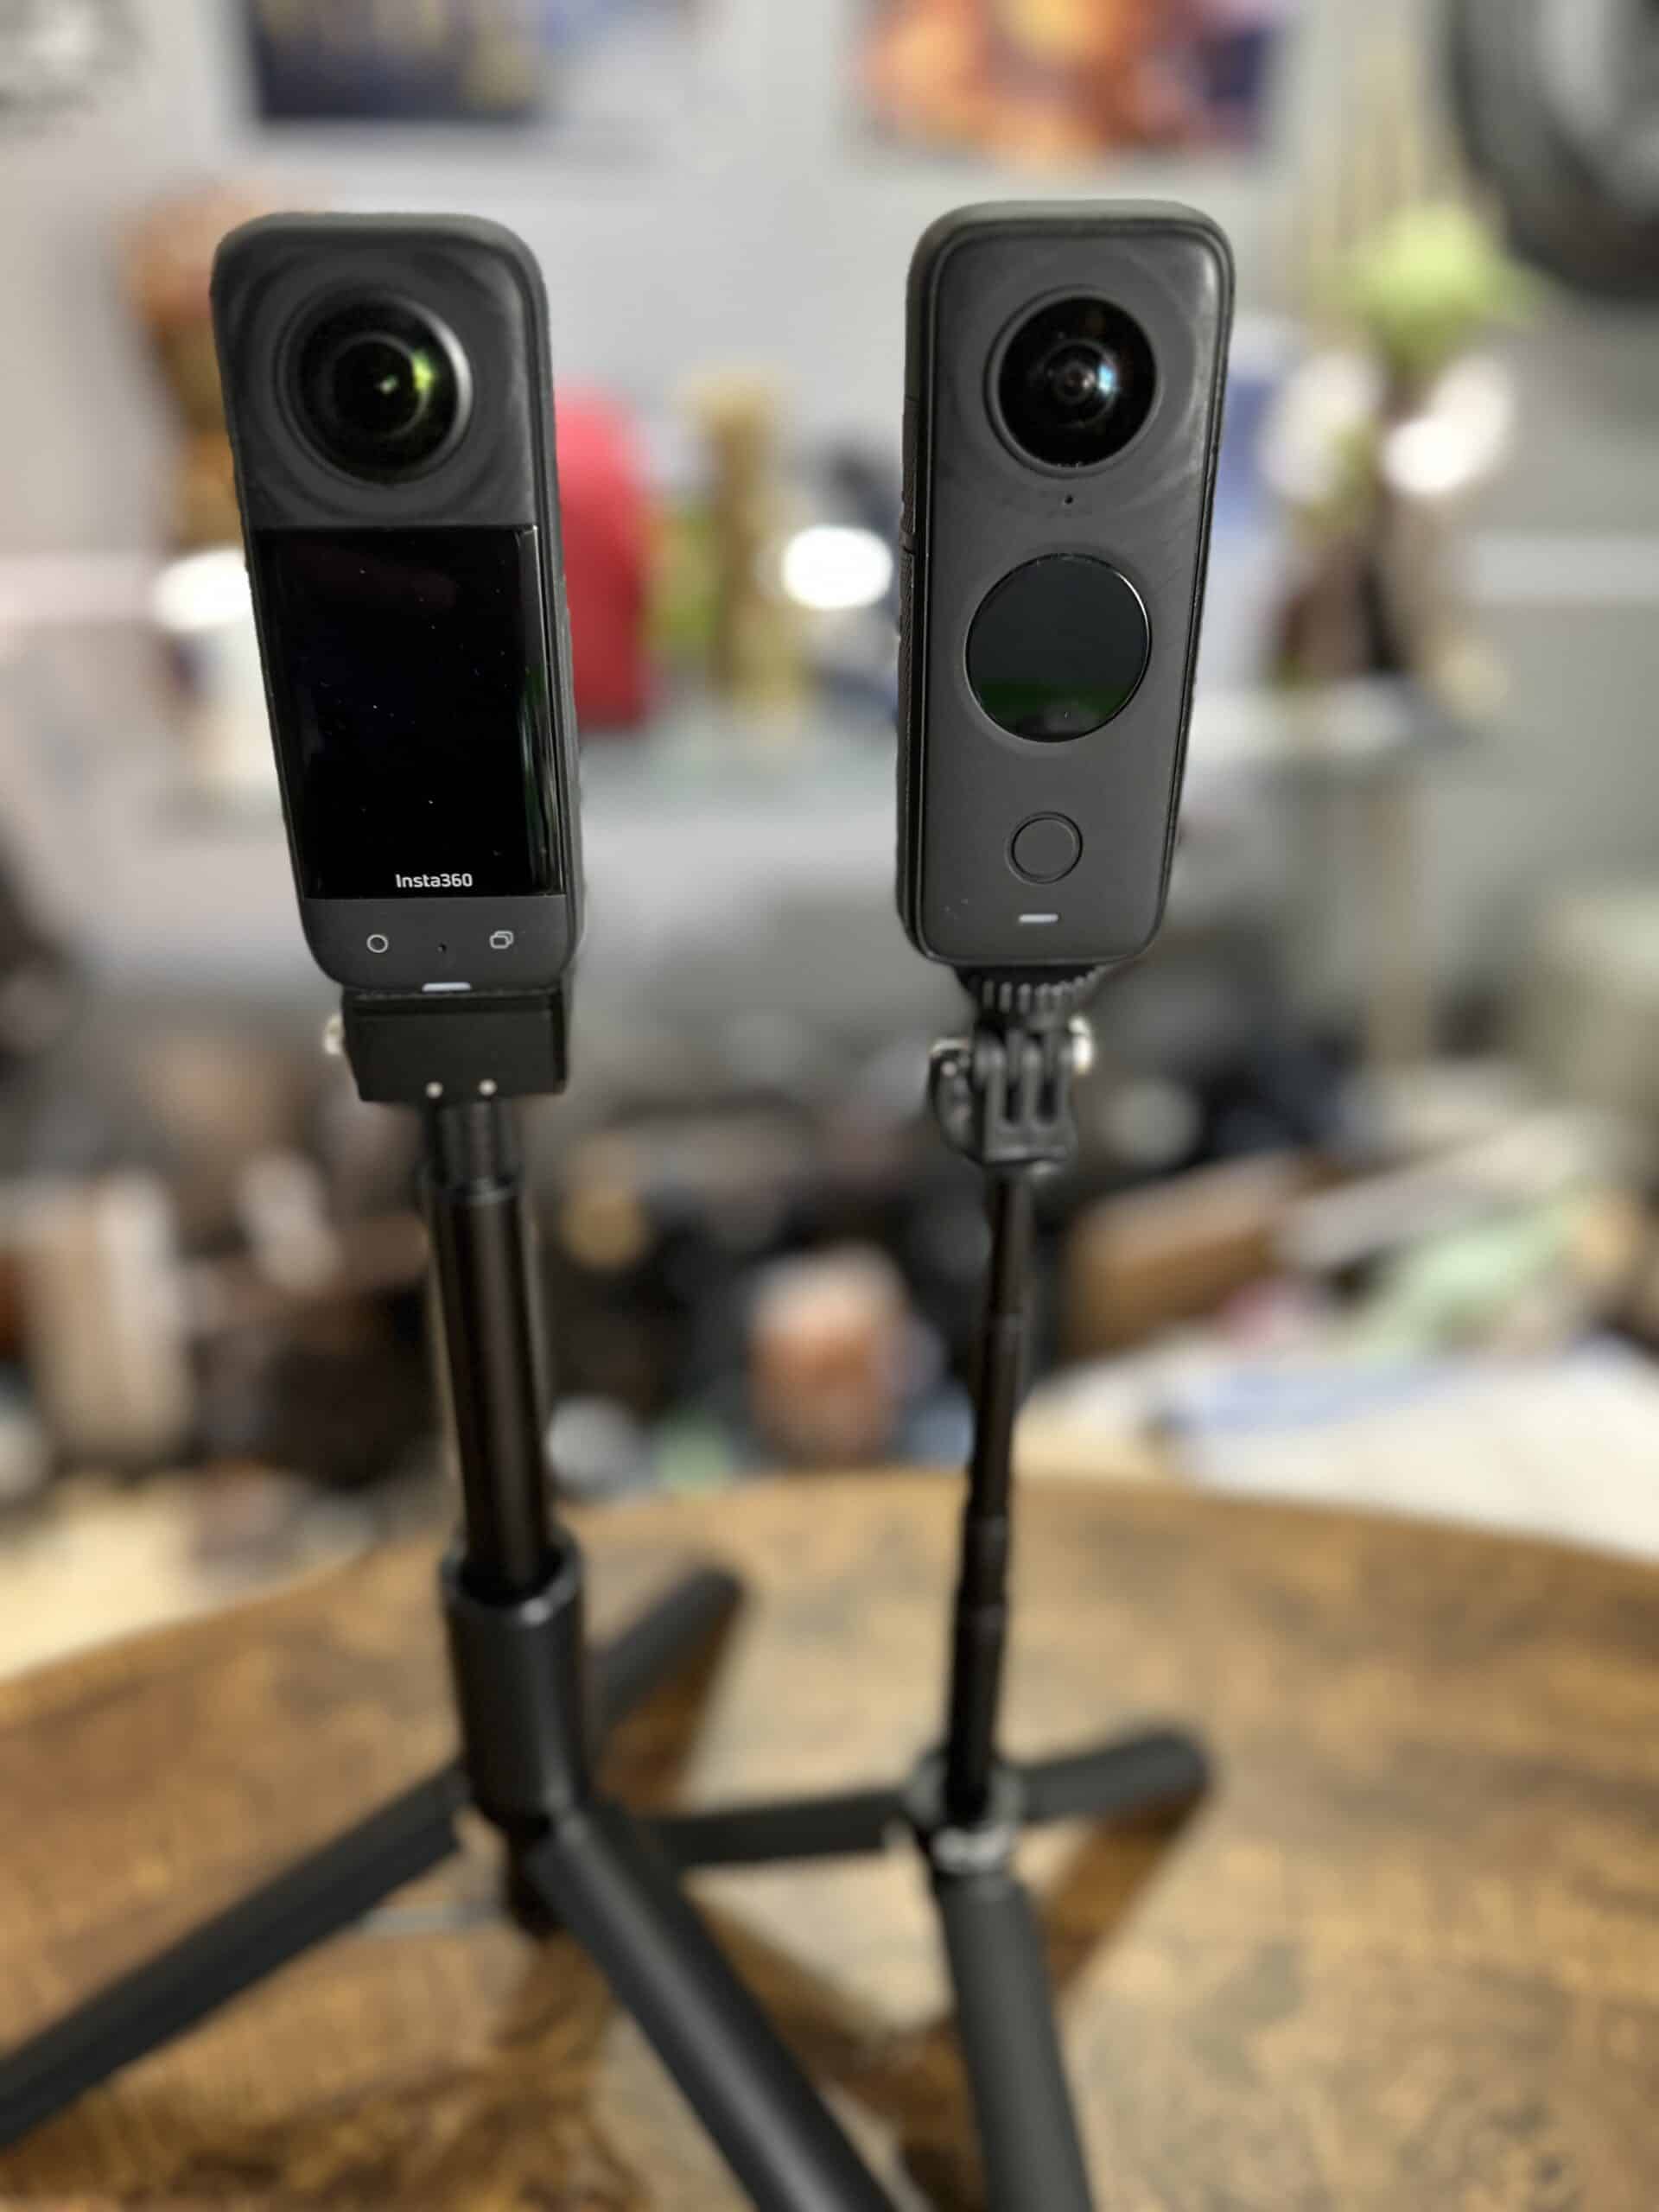 insta360 x2 and x3 on tripods front, X3 has a bigger screen